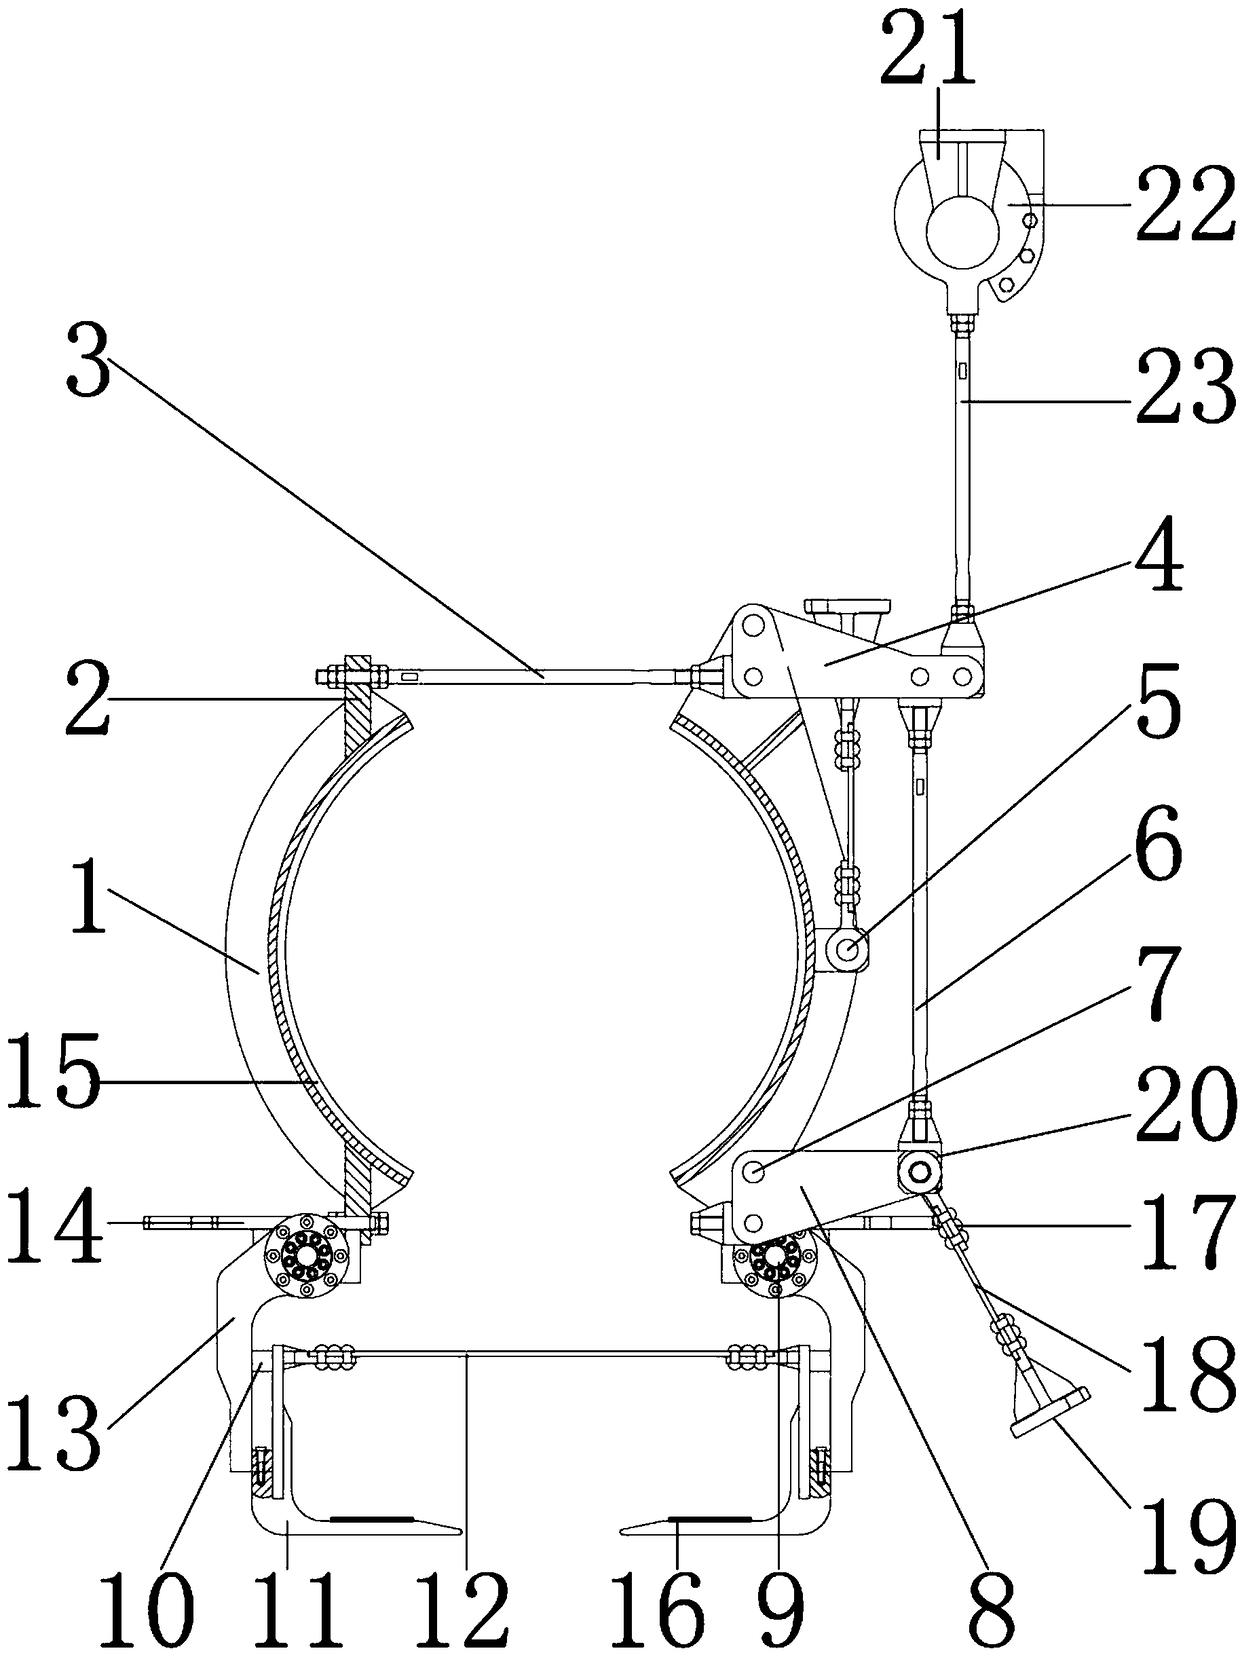 Construction steel-structure lifting and transferring method